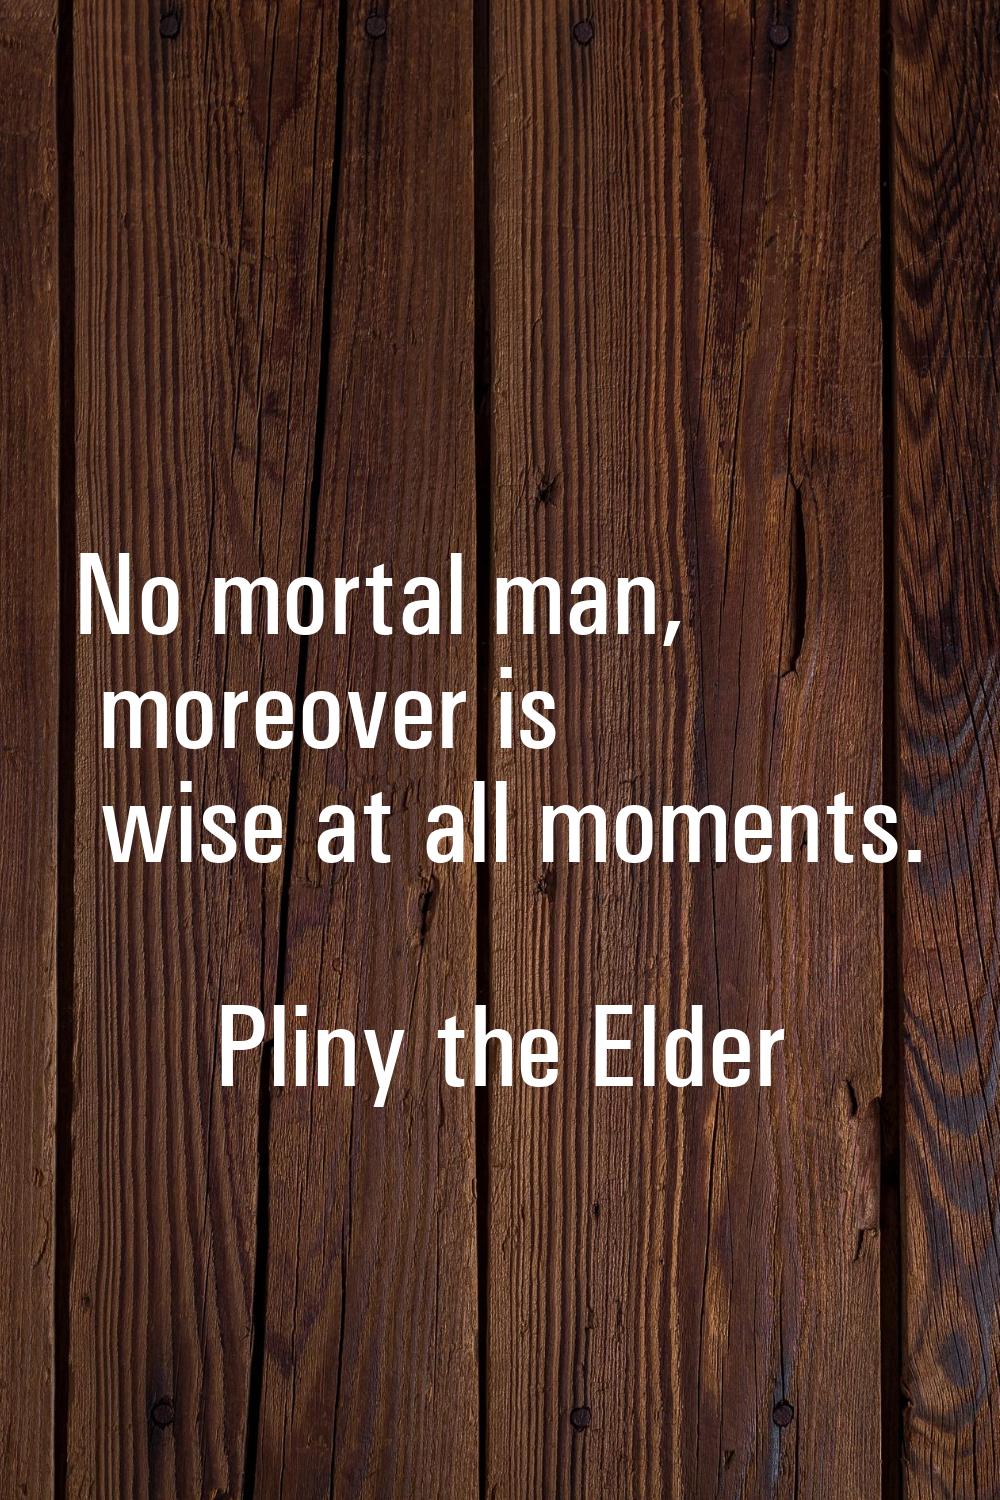 No mortal man, moreover is wise at all moments.